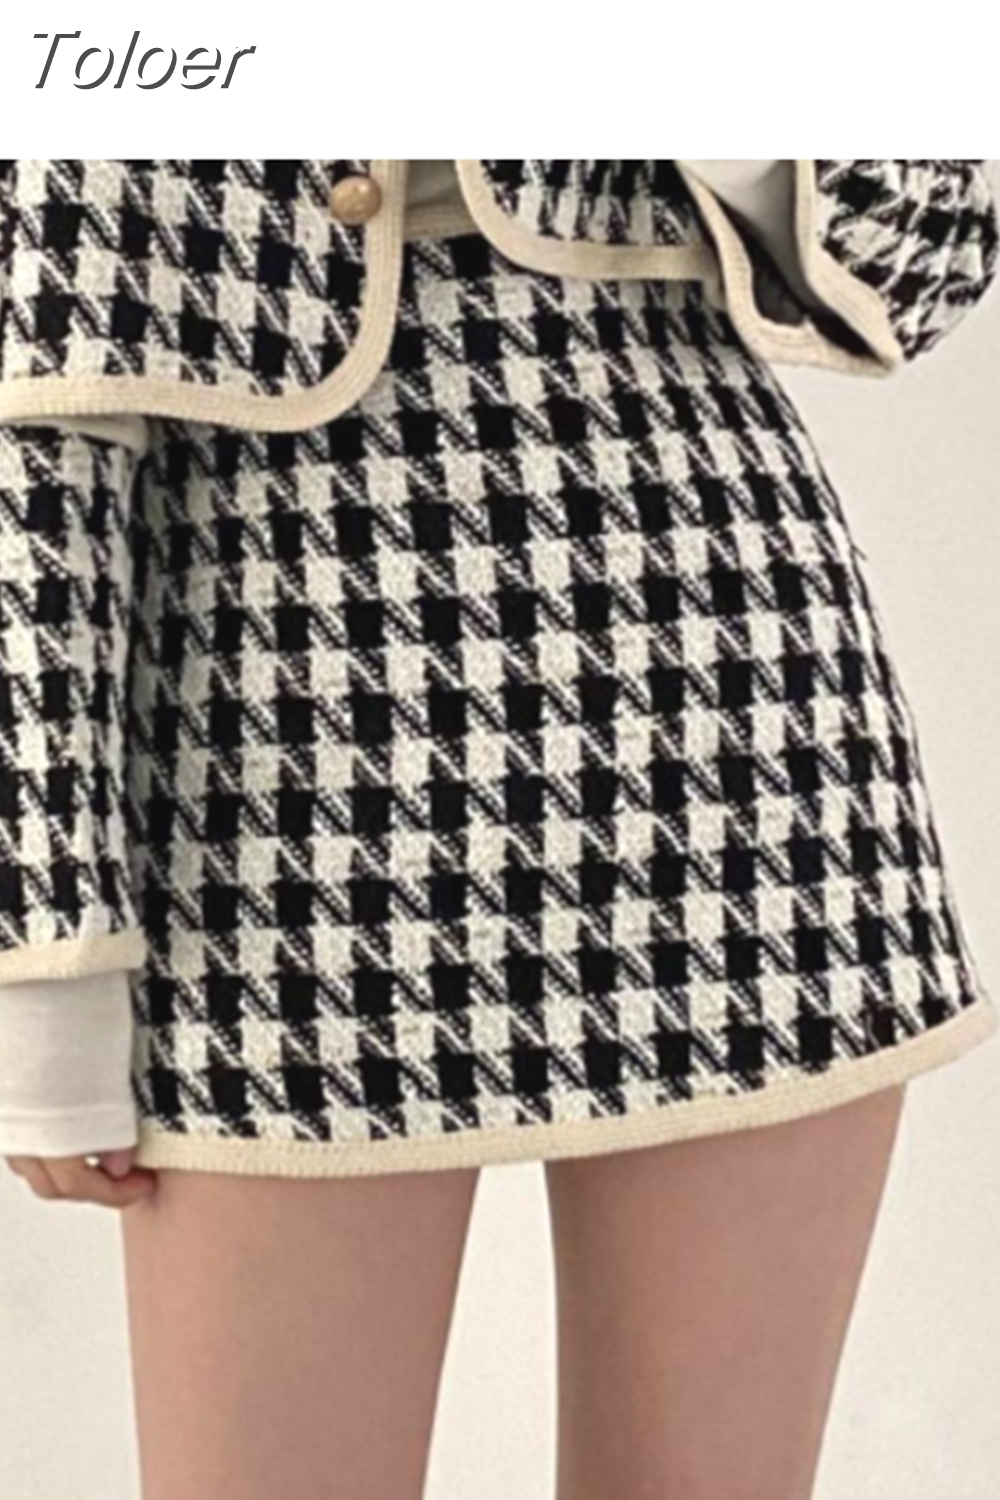 Toloer Temperament Skirt Outfits Chic Plaid Two Piece Set Women Sailor Collar Cropped Coapt Bodycon Mini Skirts Suit Office Lady Sets